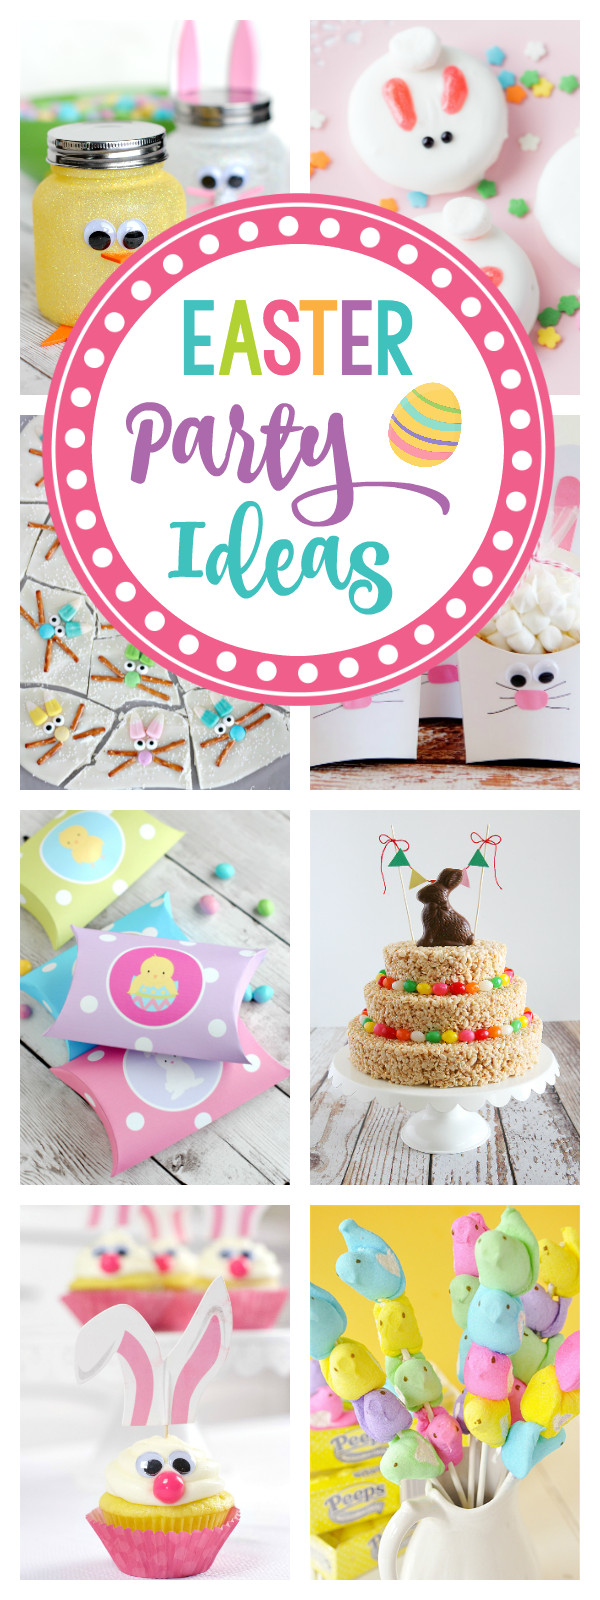 Easter Bday Party Ideas
 25 Fun Easter Party Ideas for Kids – Fun Squared